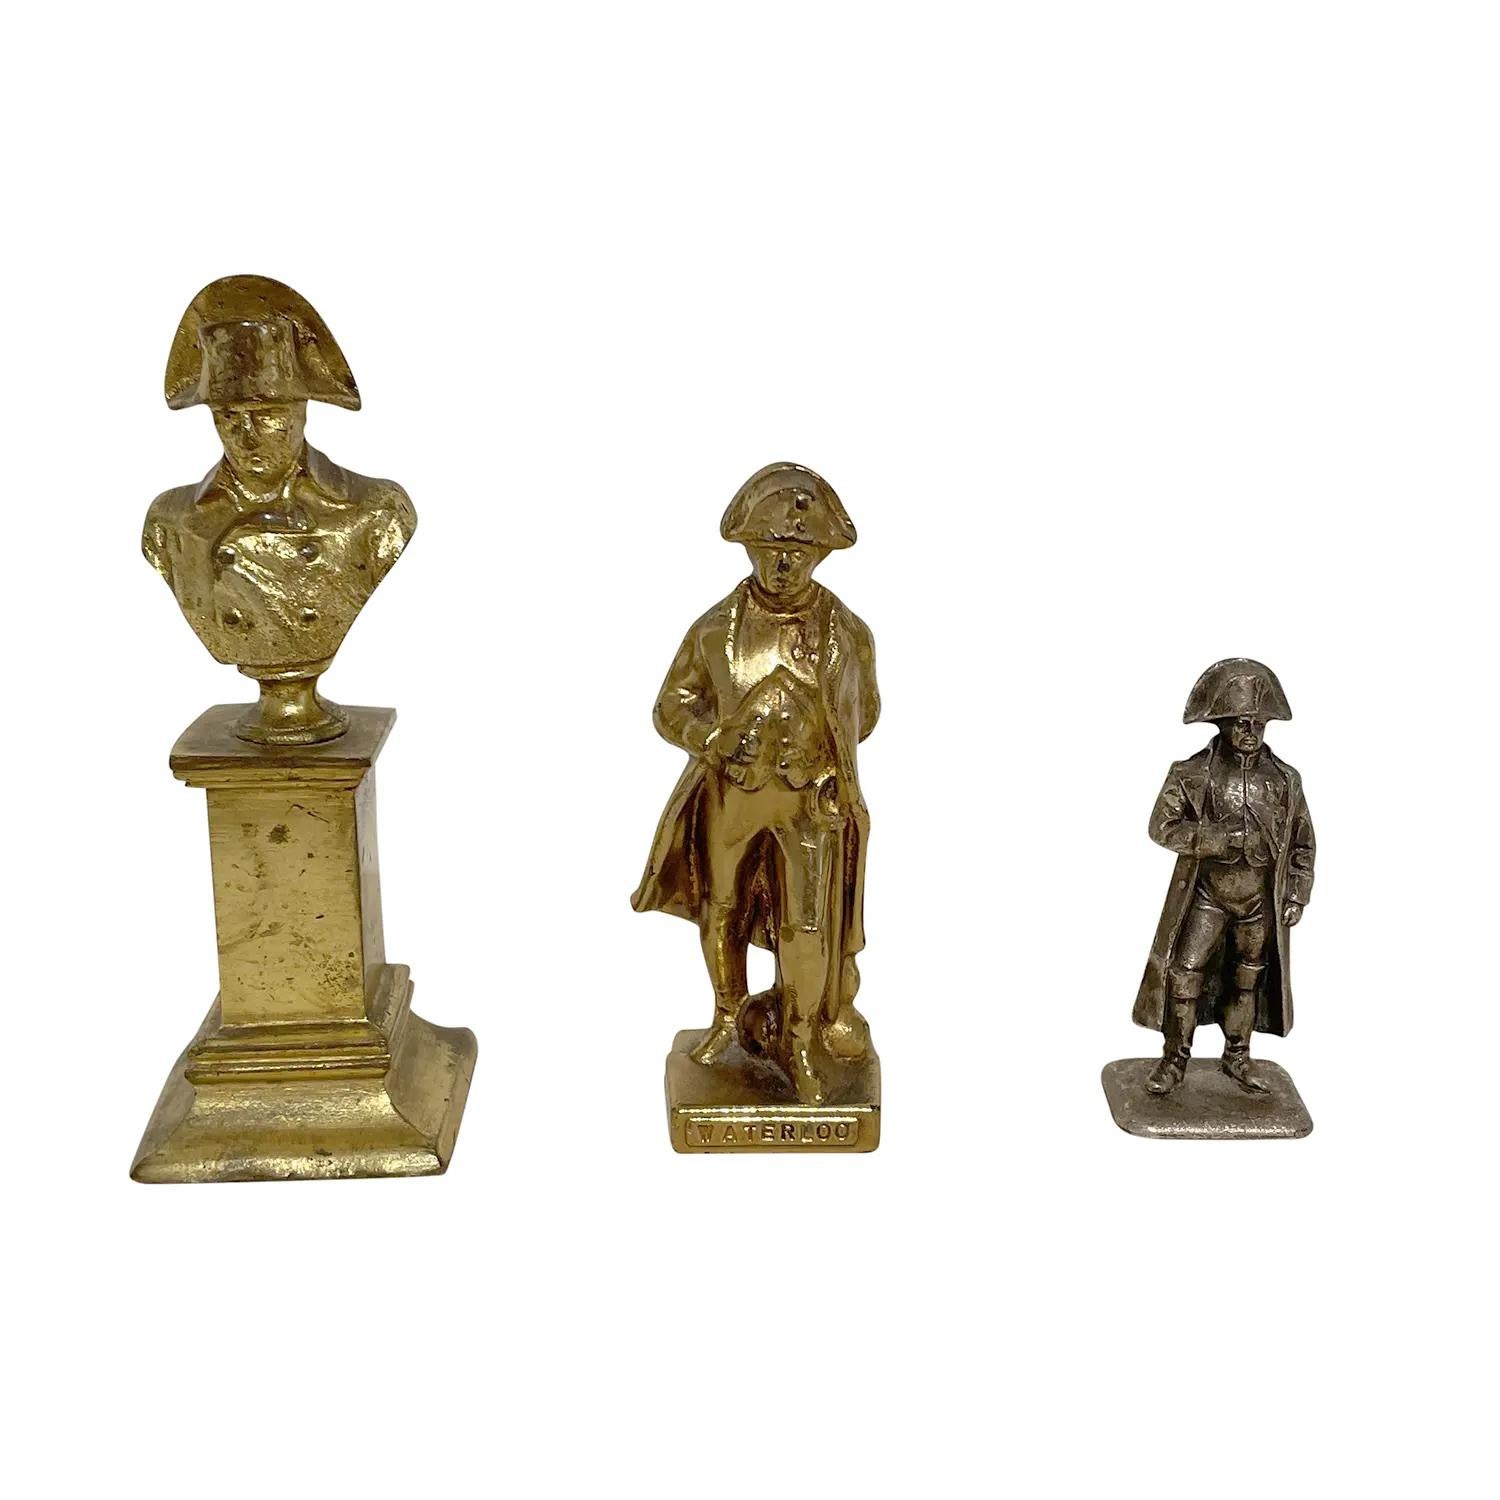 A gold-silver, antique French set of three Napoleon Bonaparte sculptures made of hand crafted metal and gilded bronze, in good condition. The particularized décor pieces represent the First French Empire time period, era also known as Napoleonic